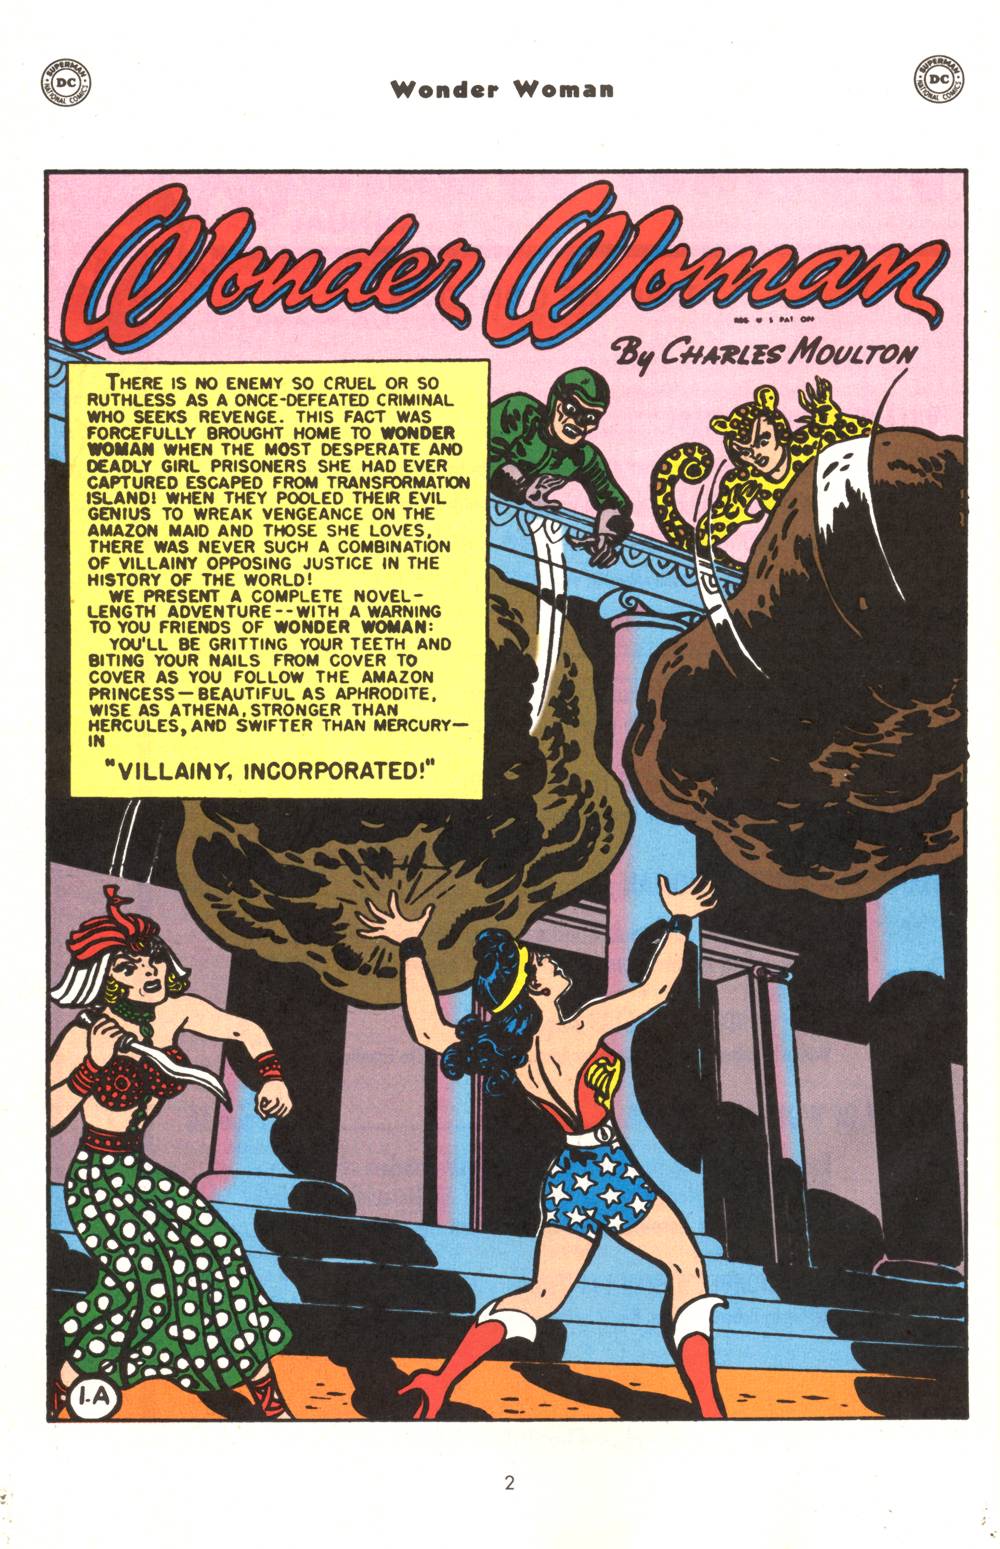 Read online Wonder Woman 80-Page Giant comic -  Issue # Full - 4